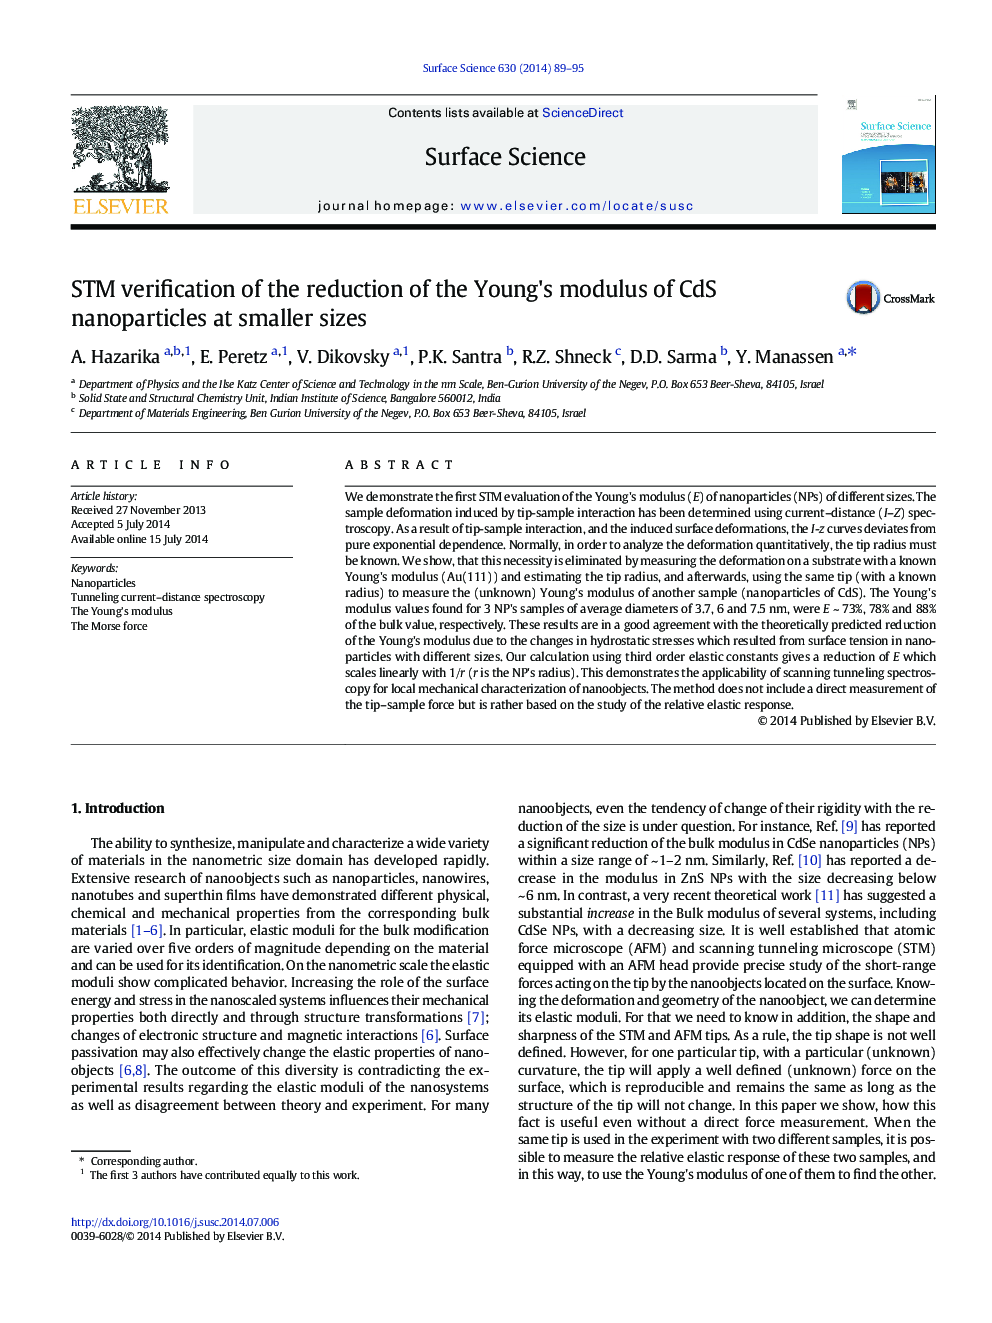 STM verification of the reduction of the Young's modulus of CdS nanoparticles at smaller sizes